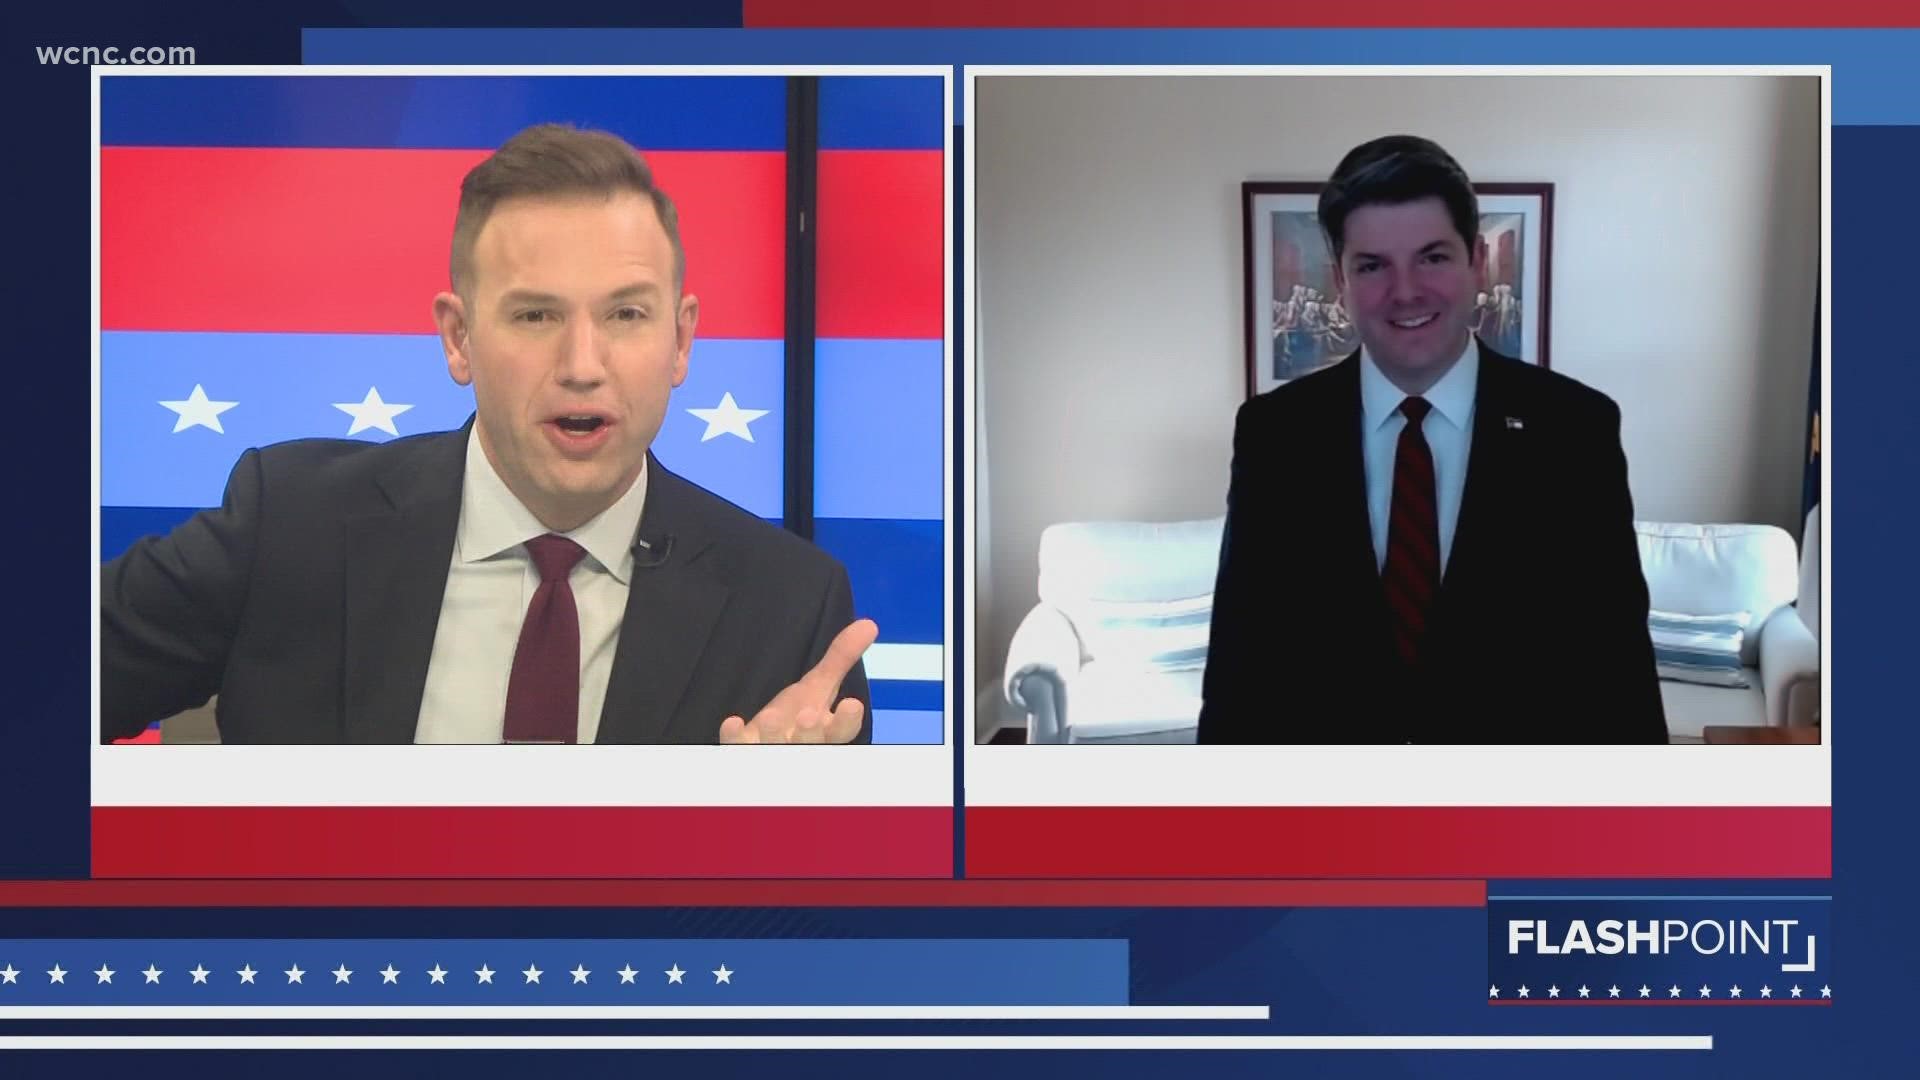 On Flashpoint, state senate candidate Brad Overcash says the process was transparent.